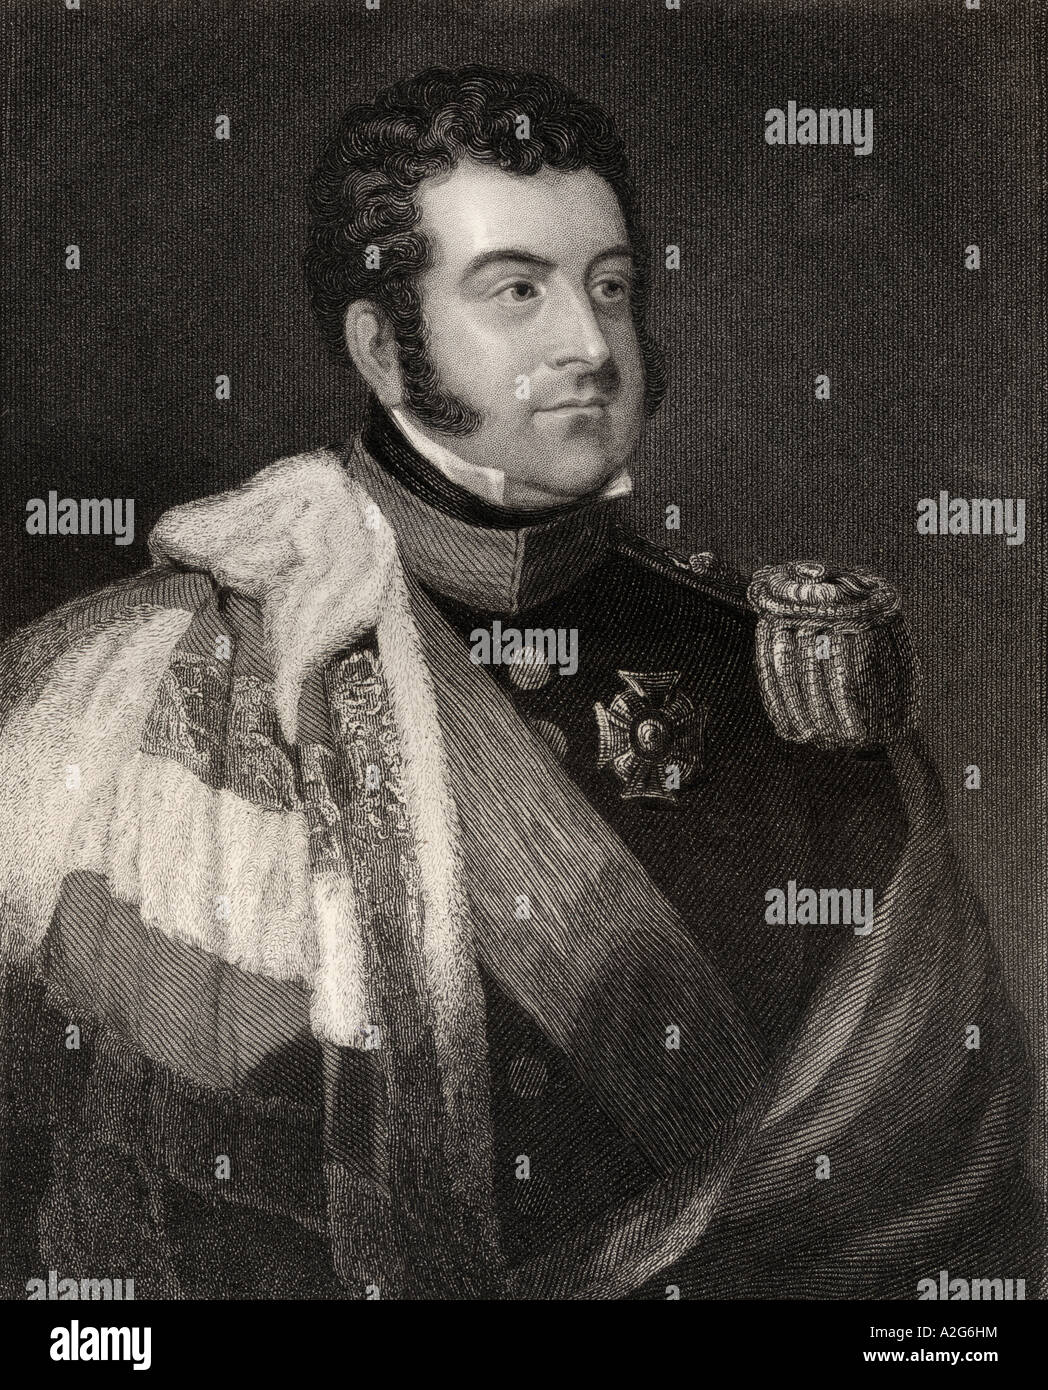 George Augustus Frederick Fitzclarence, 1st Earl of Munster, 1794 - 1842.  English peer and soldier. Stock Photo